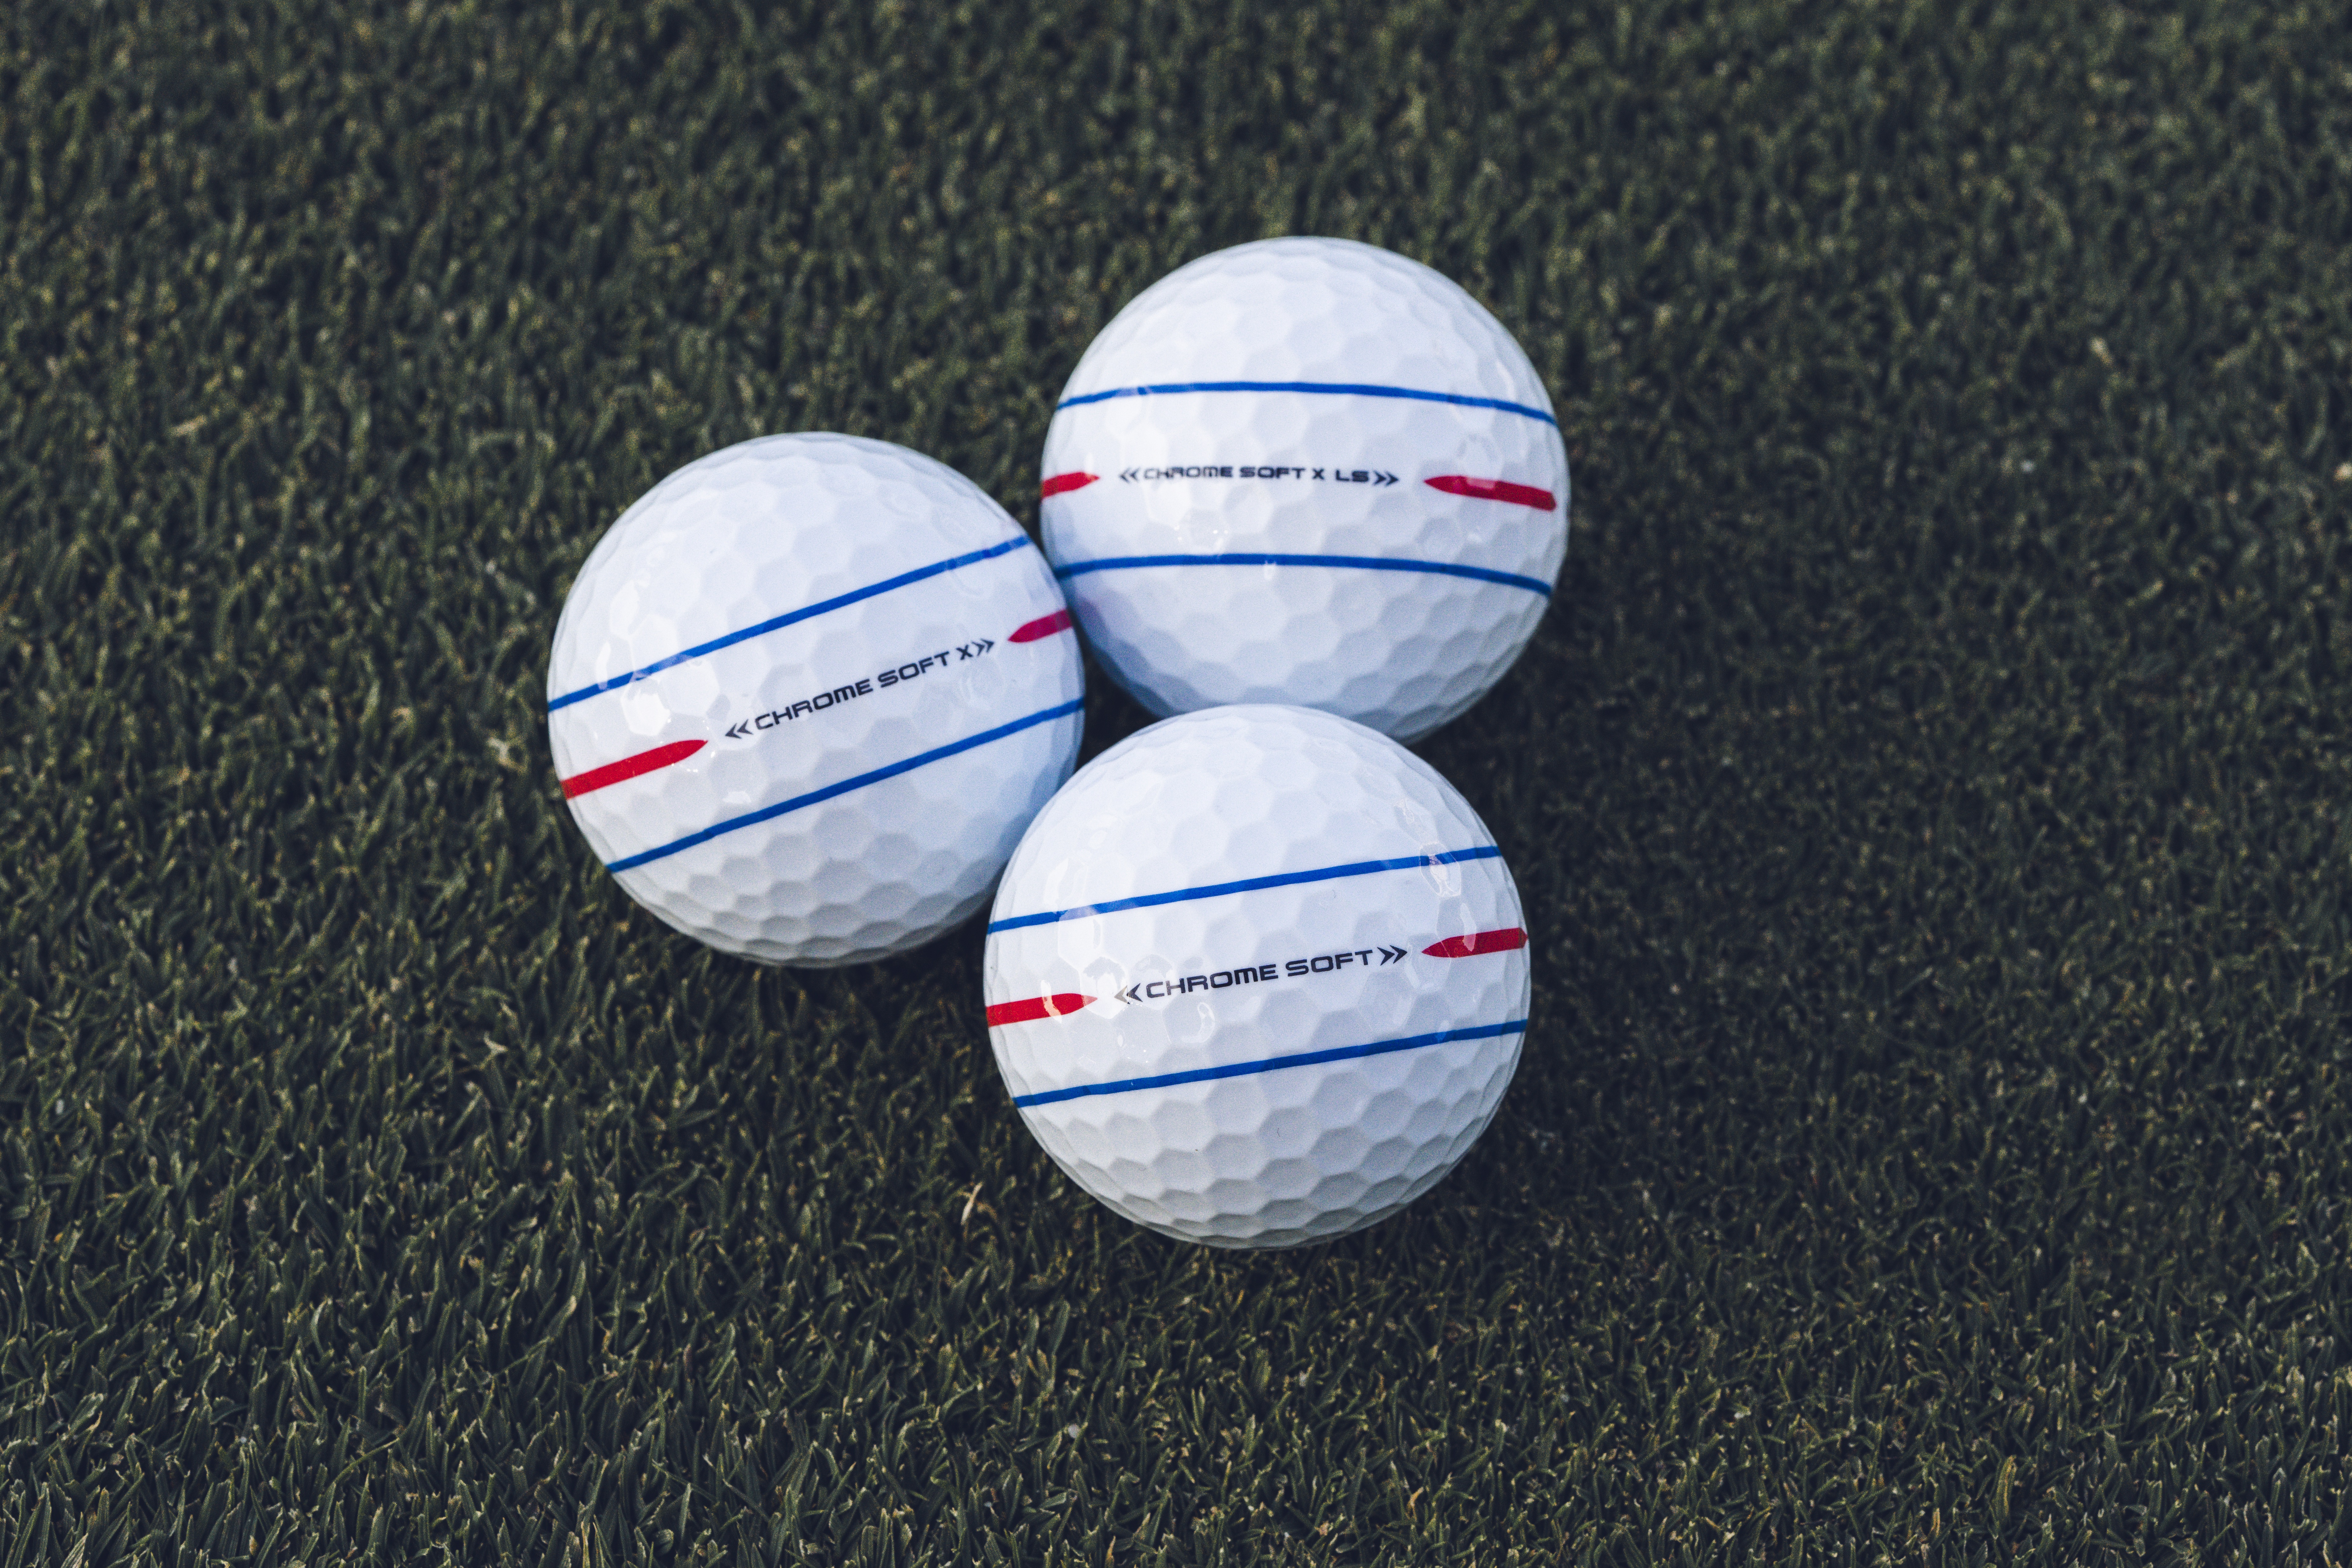 How Bridgestone is tweaking the dimple pattern in its e-Series balls to get you more distance This is the Loop Golf Digest